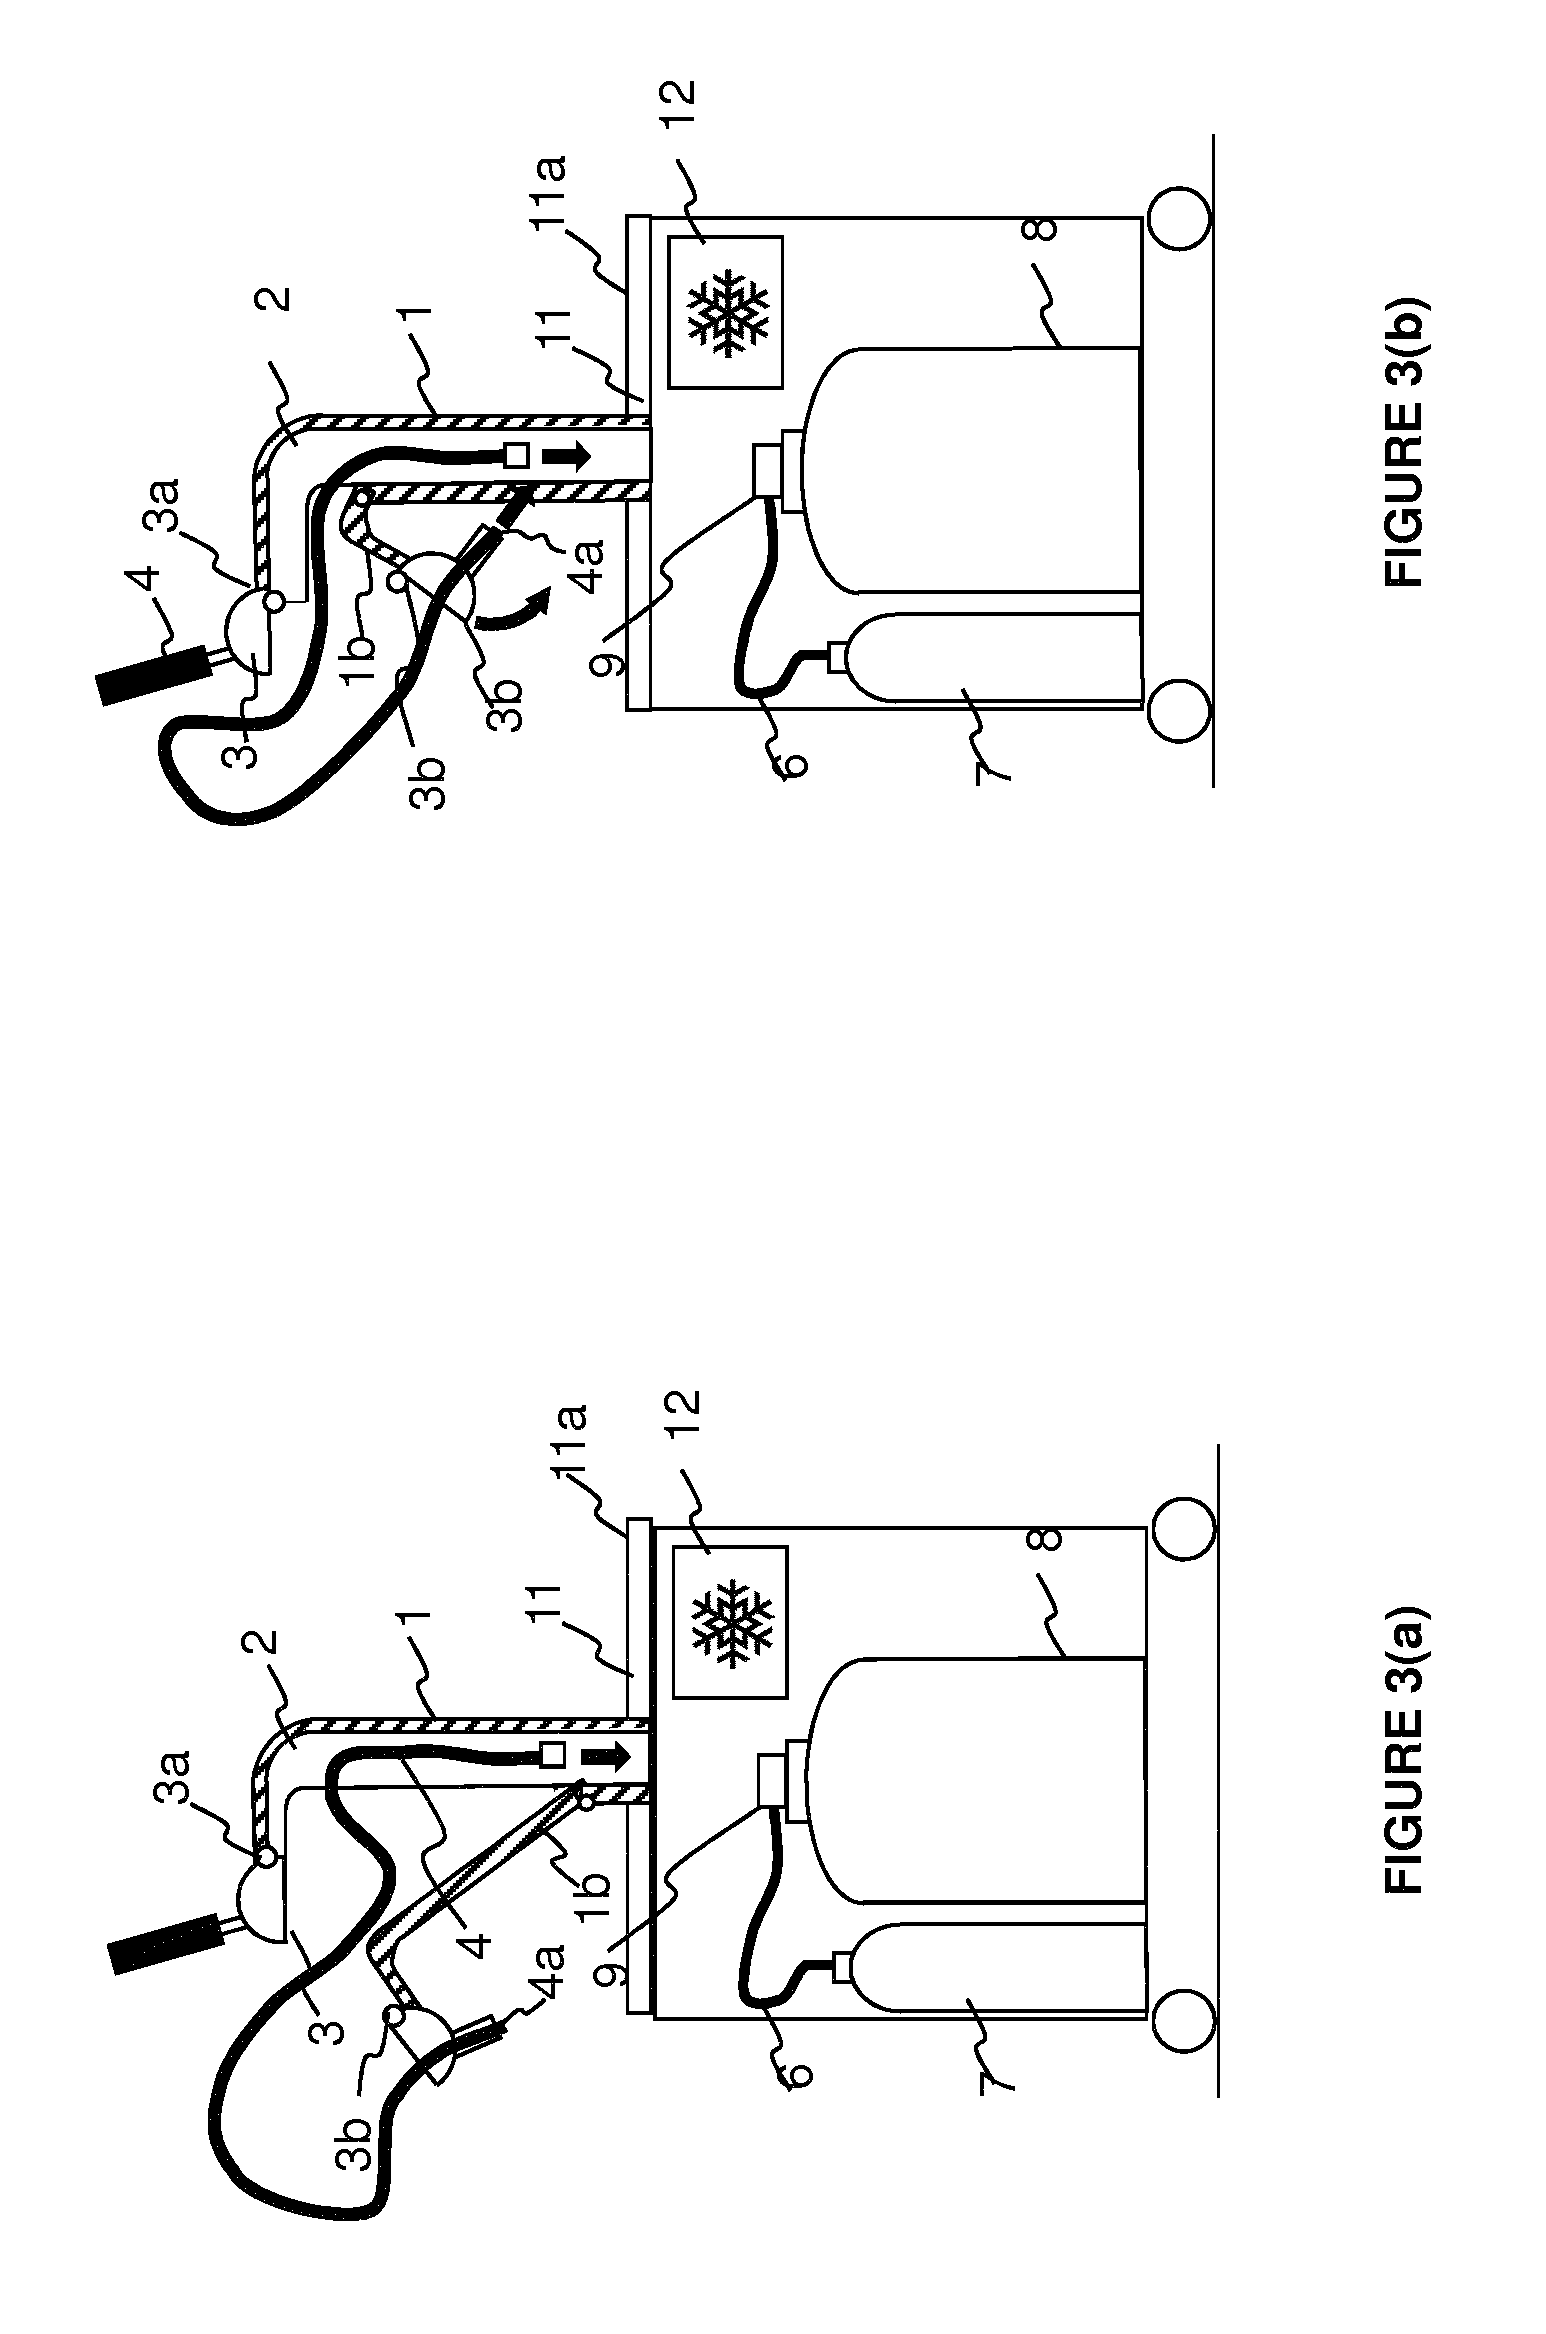 Beverage dispensing unit with openable pinch valve